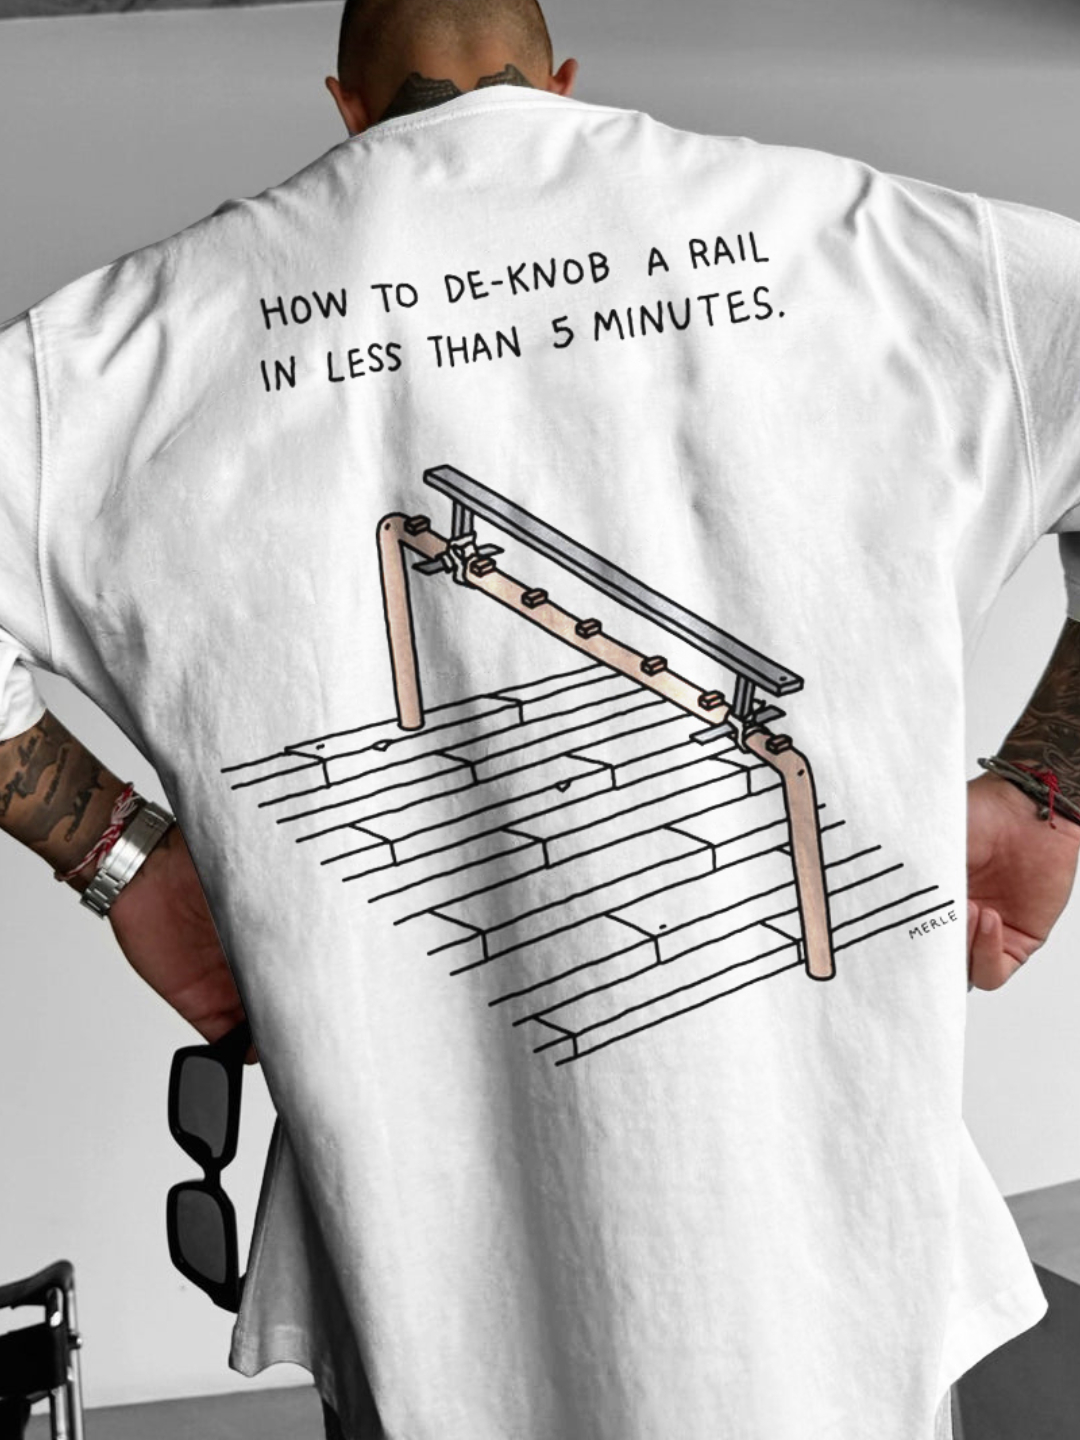 "How to de-knob a rall in less than 5 minutes." Skate T-shirt